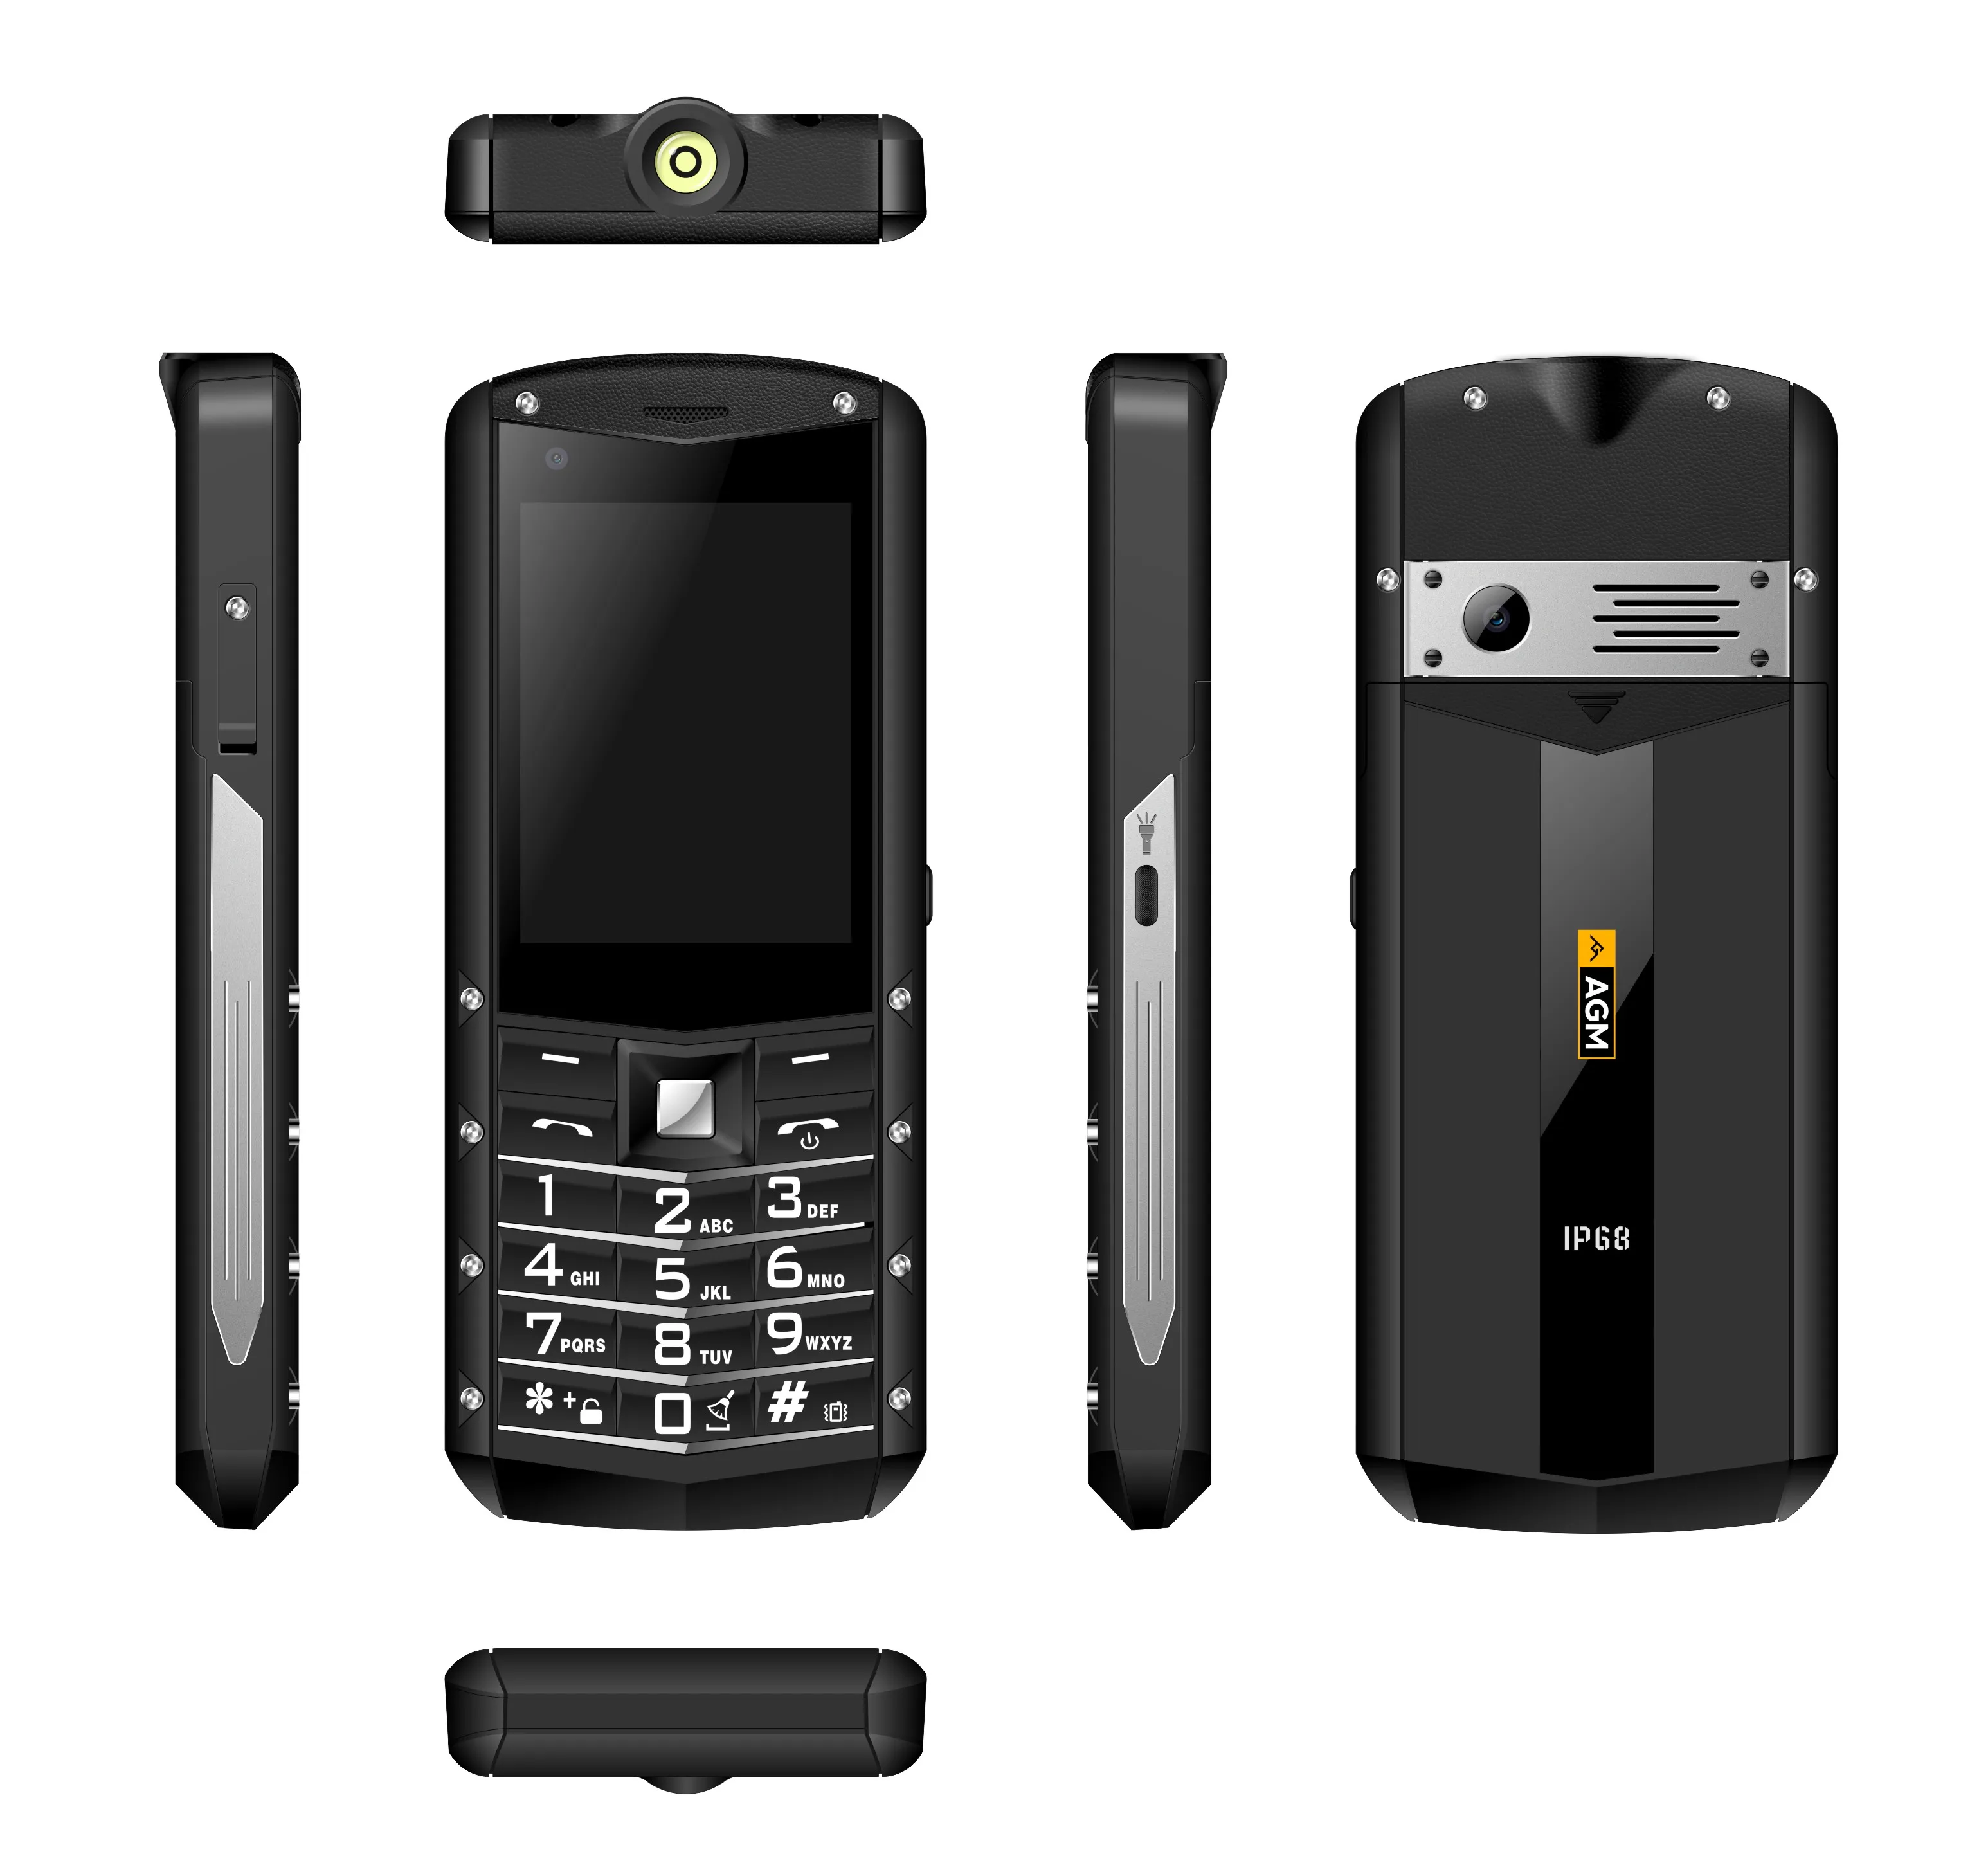 

AGM M5 Simplified Android OS 2.8 "4G LTE Type C Touch Screen 2.0MP IP68 Waterproof Rugged Featured Mobile Phone